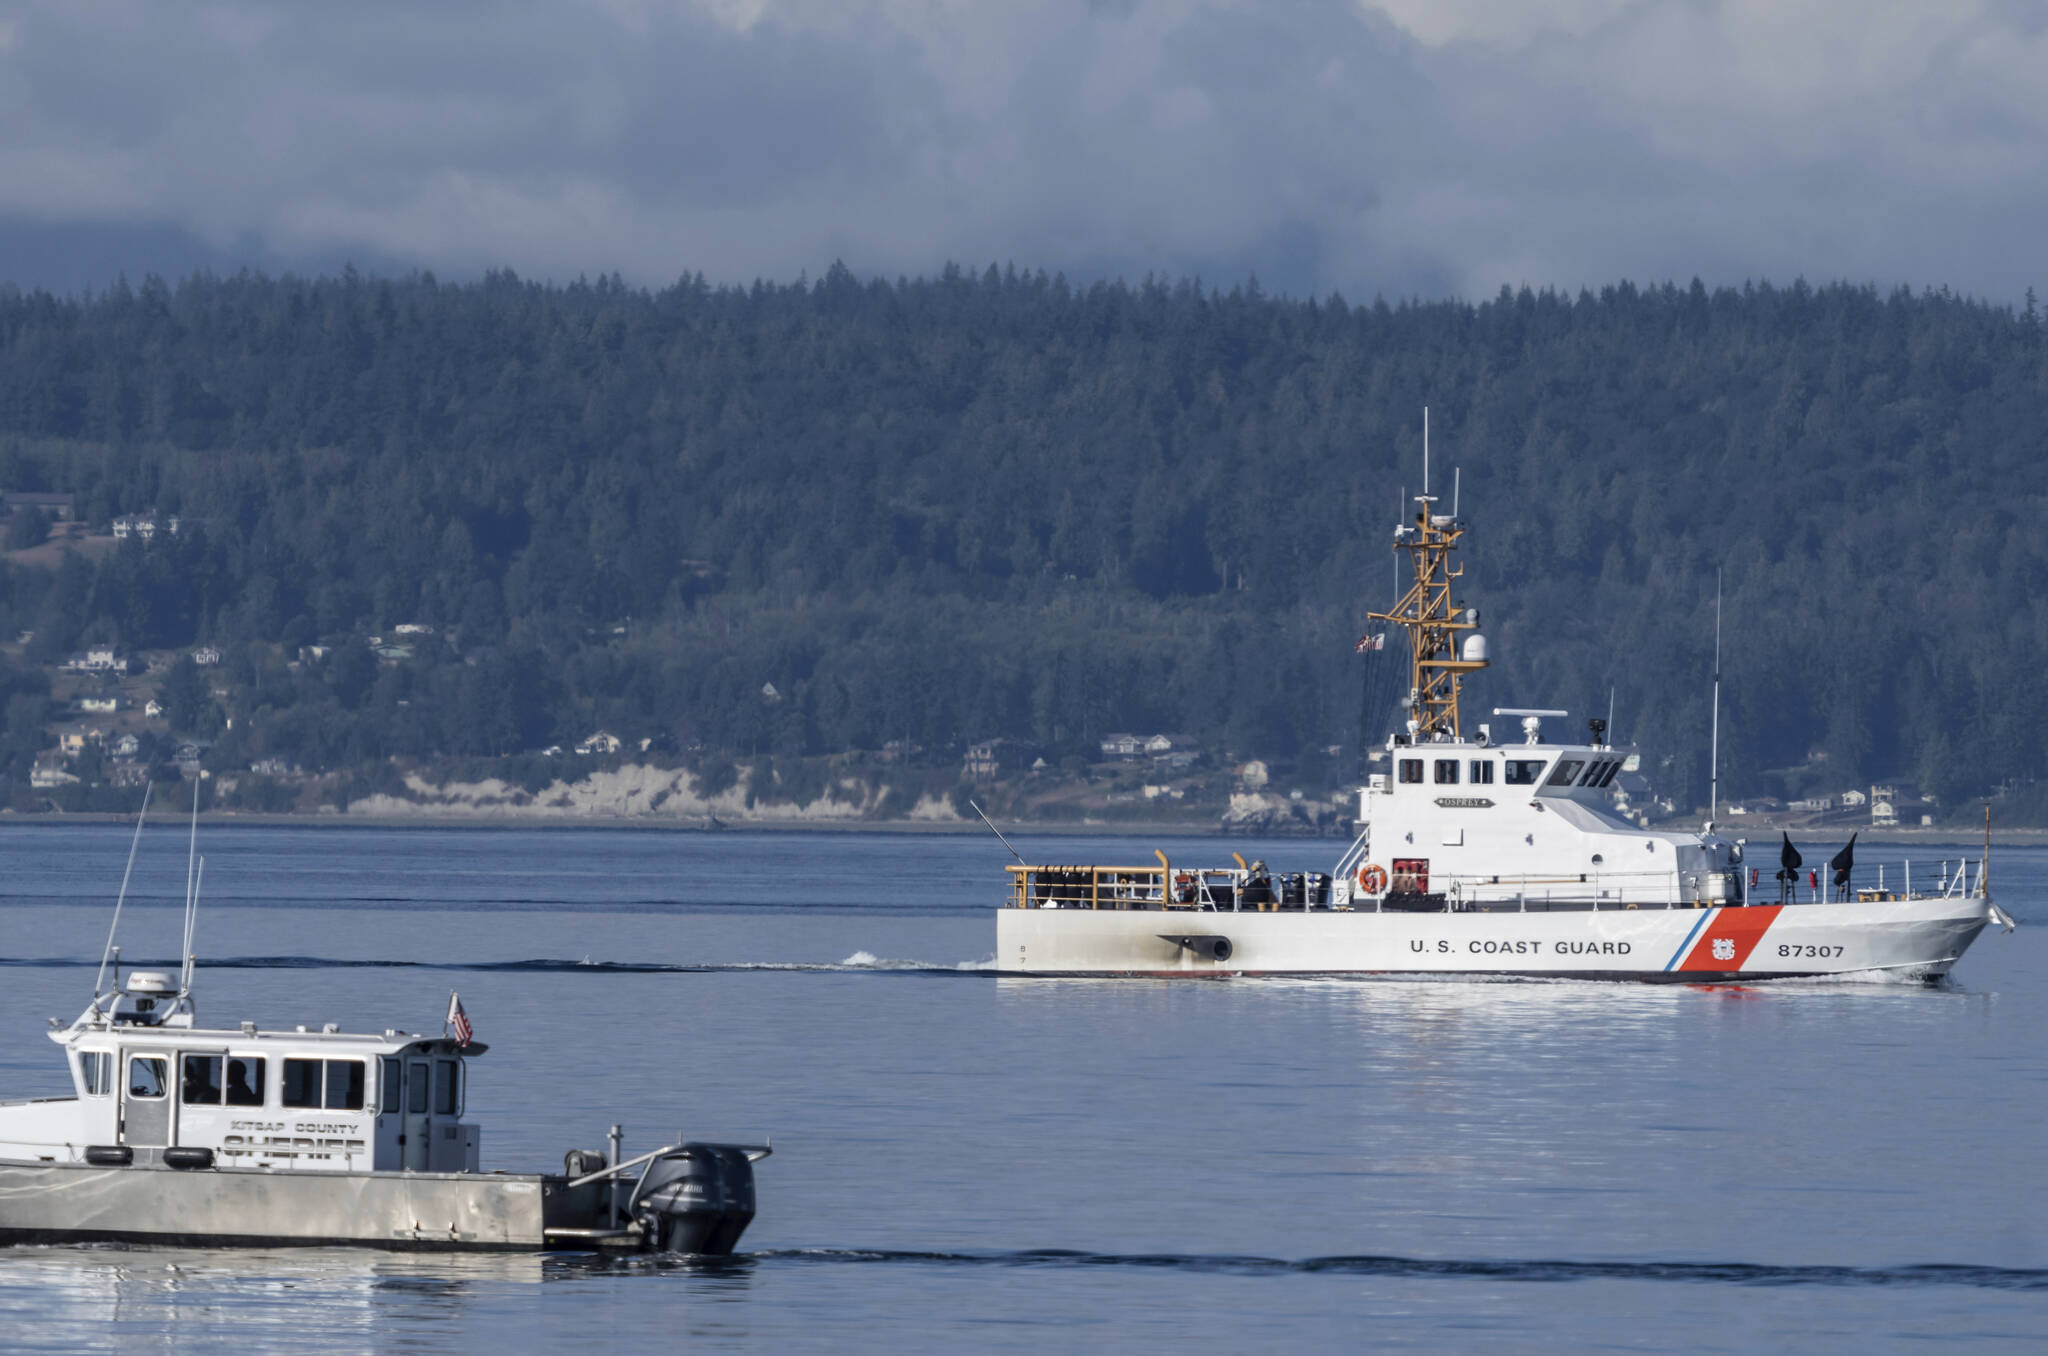 FILE - A U.S. Coast Guard boat and Kitsap, Wash., County Sheriff boat search the area, Monday, Sept. 5, 2022, near Freeland, Wash., on Whidbey Island north of Seattle where a chartered floatplane crashed the day before, killing 10 people. Crews later this month will begin trying to recover the wreckage. rews later this month will begin trying to recover the wreckage of a seaplane that crashed in Puget Sound off Whidbey Island in Washington state. The National Transportation Board said Friday, Sept. 16, 2022 it will work with the Navy to collect the wreckage of the DHC-3 Turbine Otter. (AP Photo/Stephen Brashear, File)